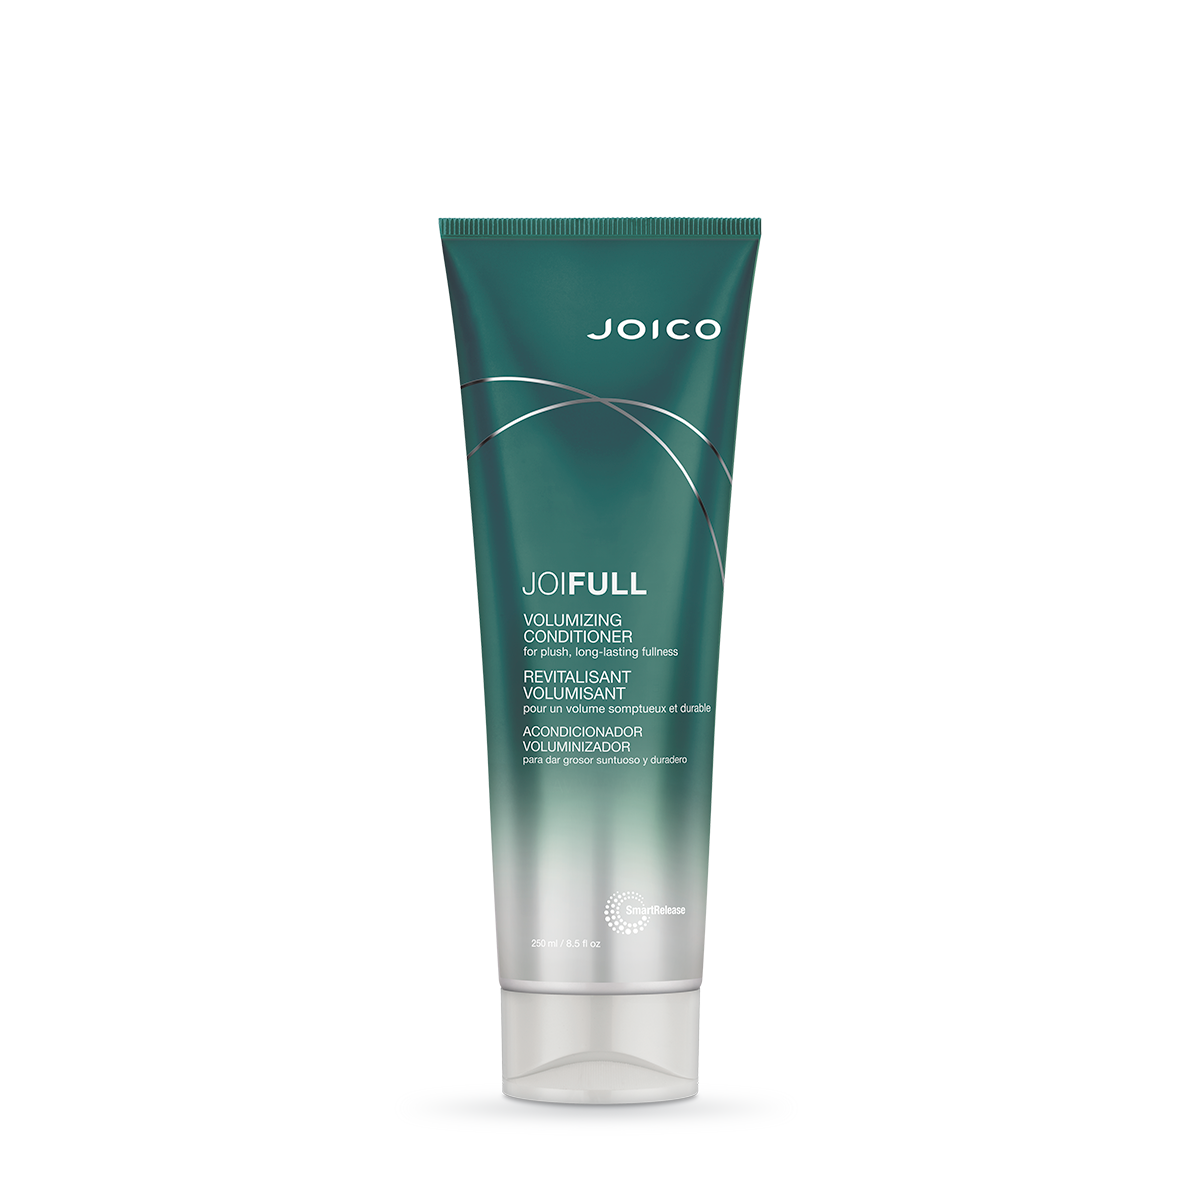 Joico Joifull conditioner